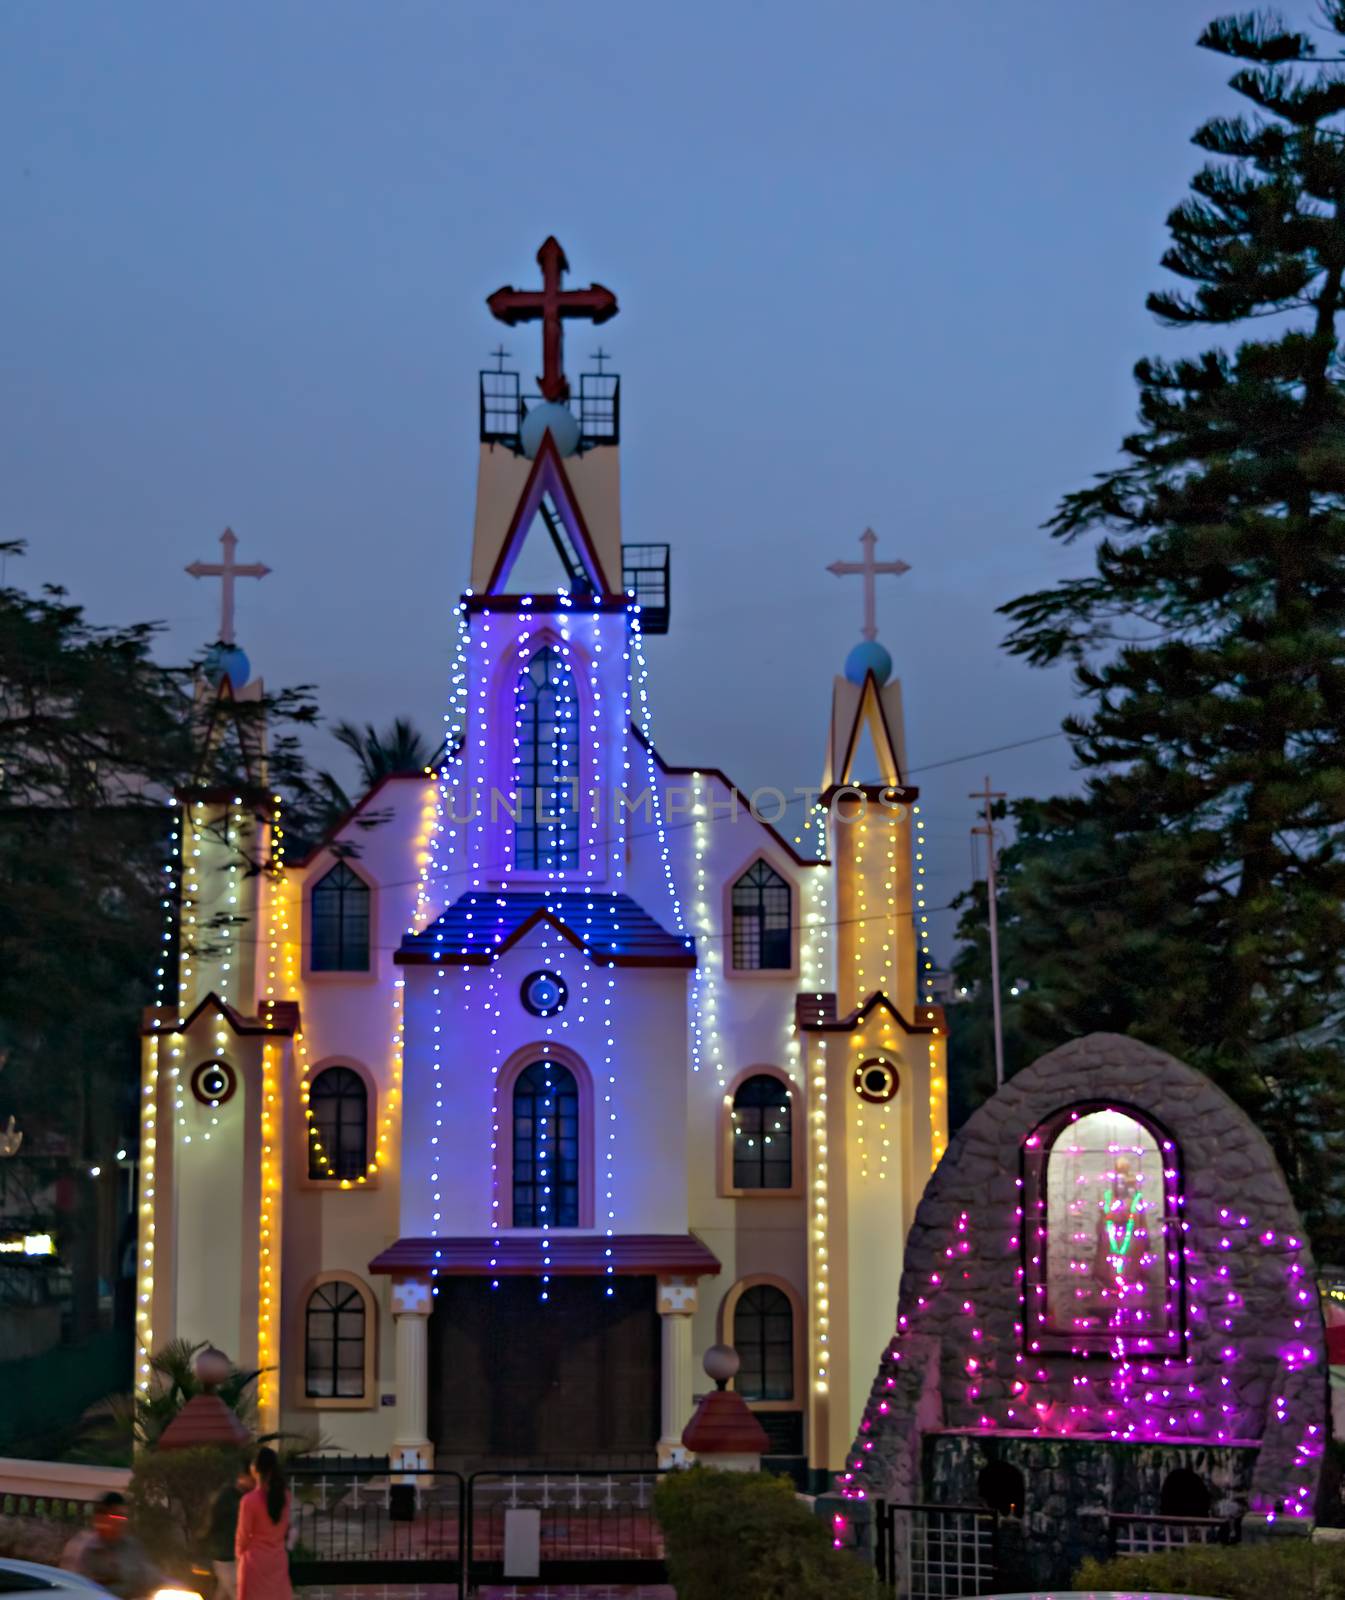 Lighting done on Church on the occasion of Christmas in Warje, pune, India. by lalam